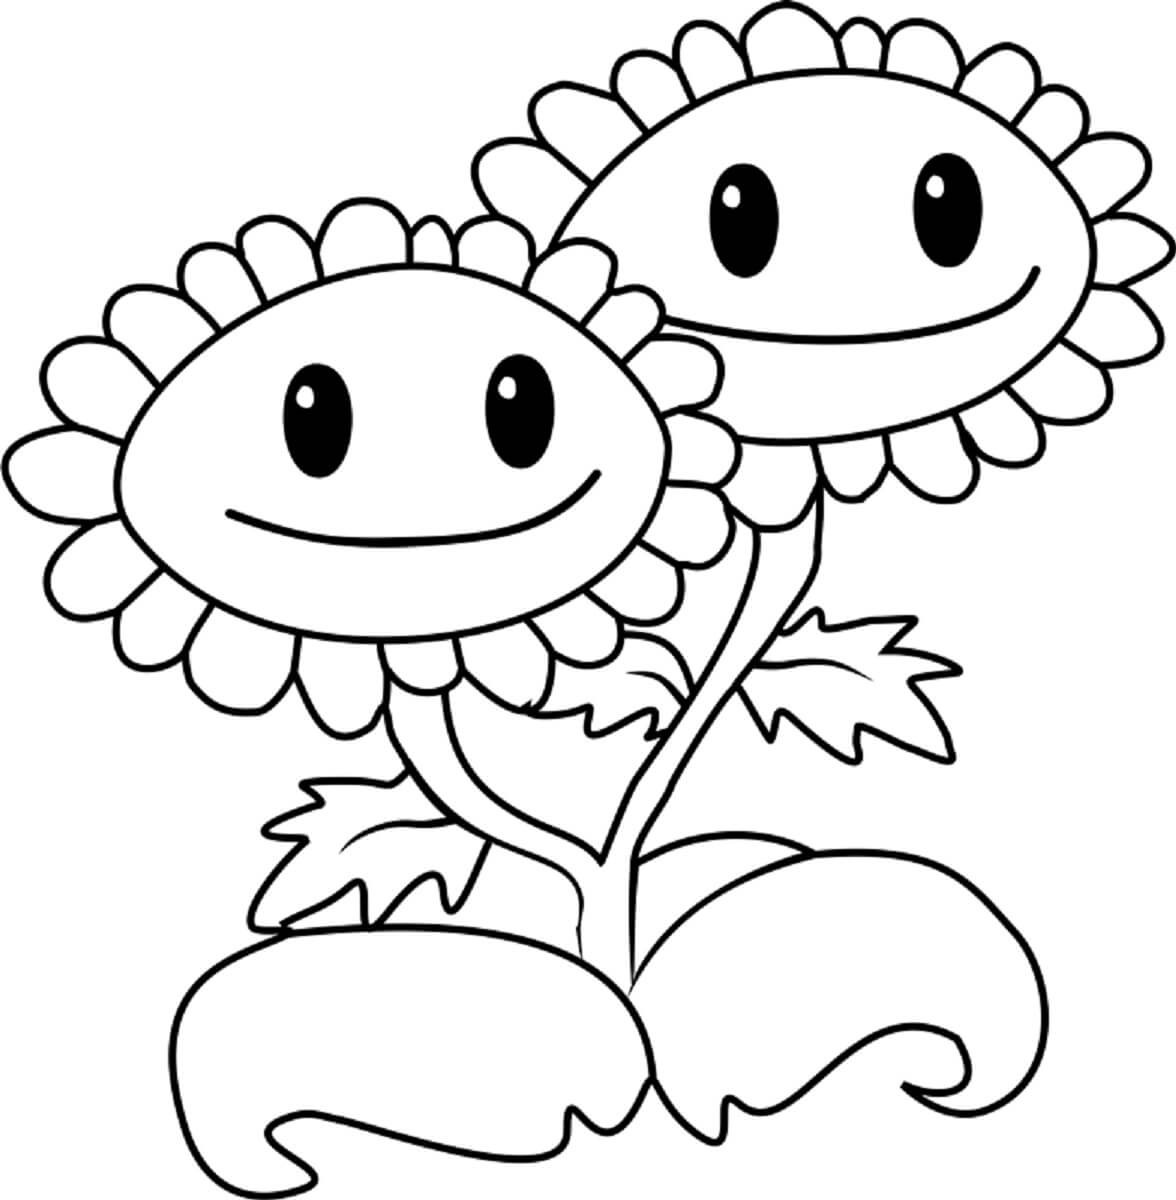 Smiling twin sunflower in plants and zombies coloring page